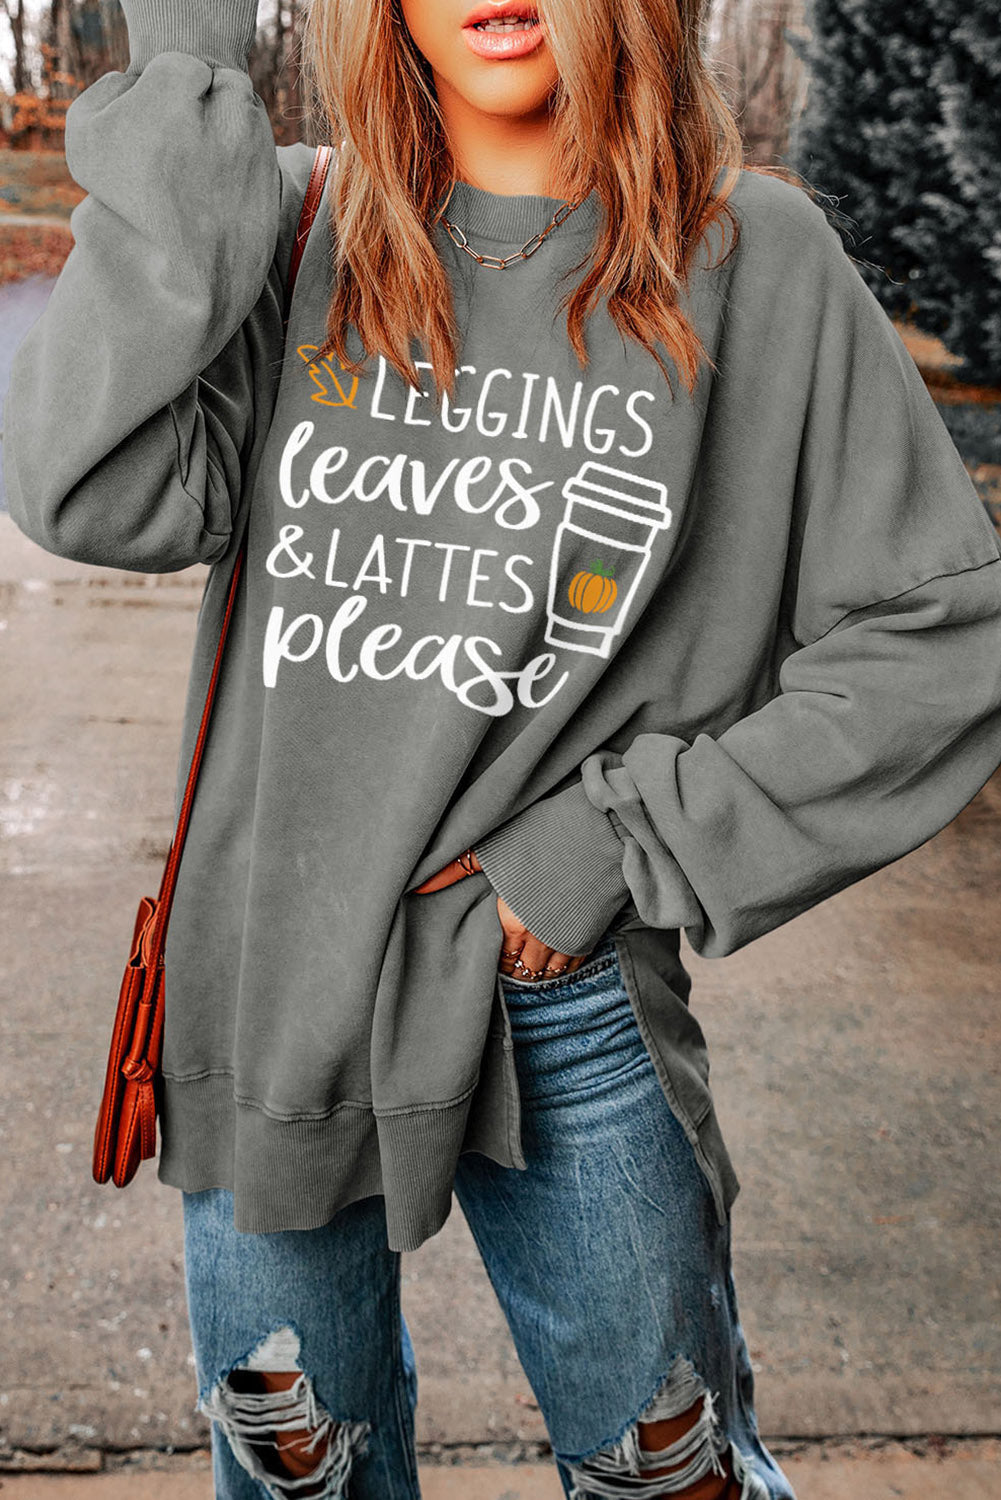 Round Neck Dropped Shoulder LEGGINGS LEAVES LATTES PLEASE Graphic Sweatshirt The Stout Steer